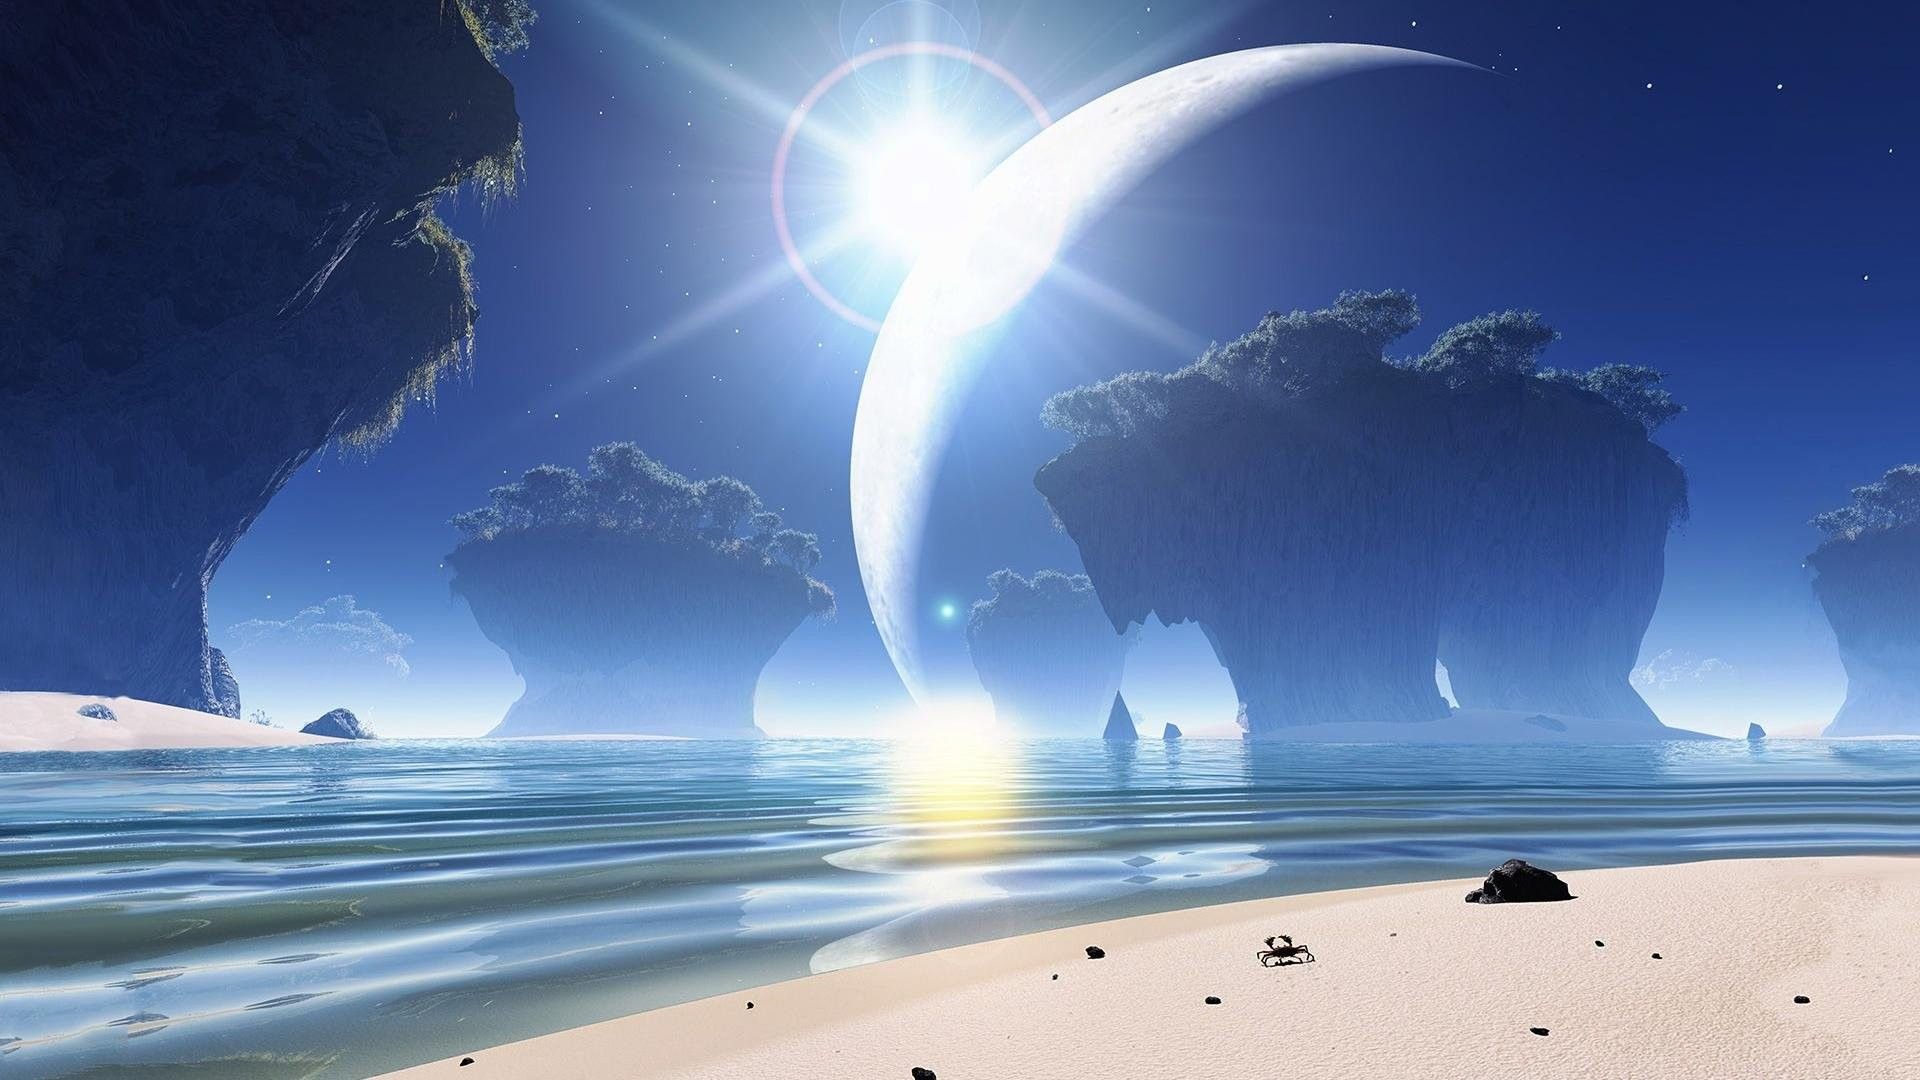 Anime Beach Scenery Wallpaper 6379 Waves Wallpaper & Background Download